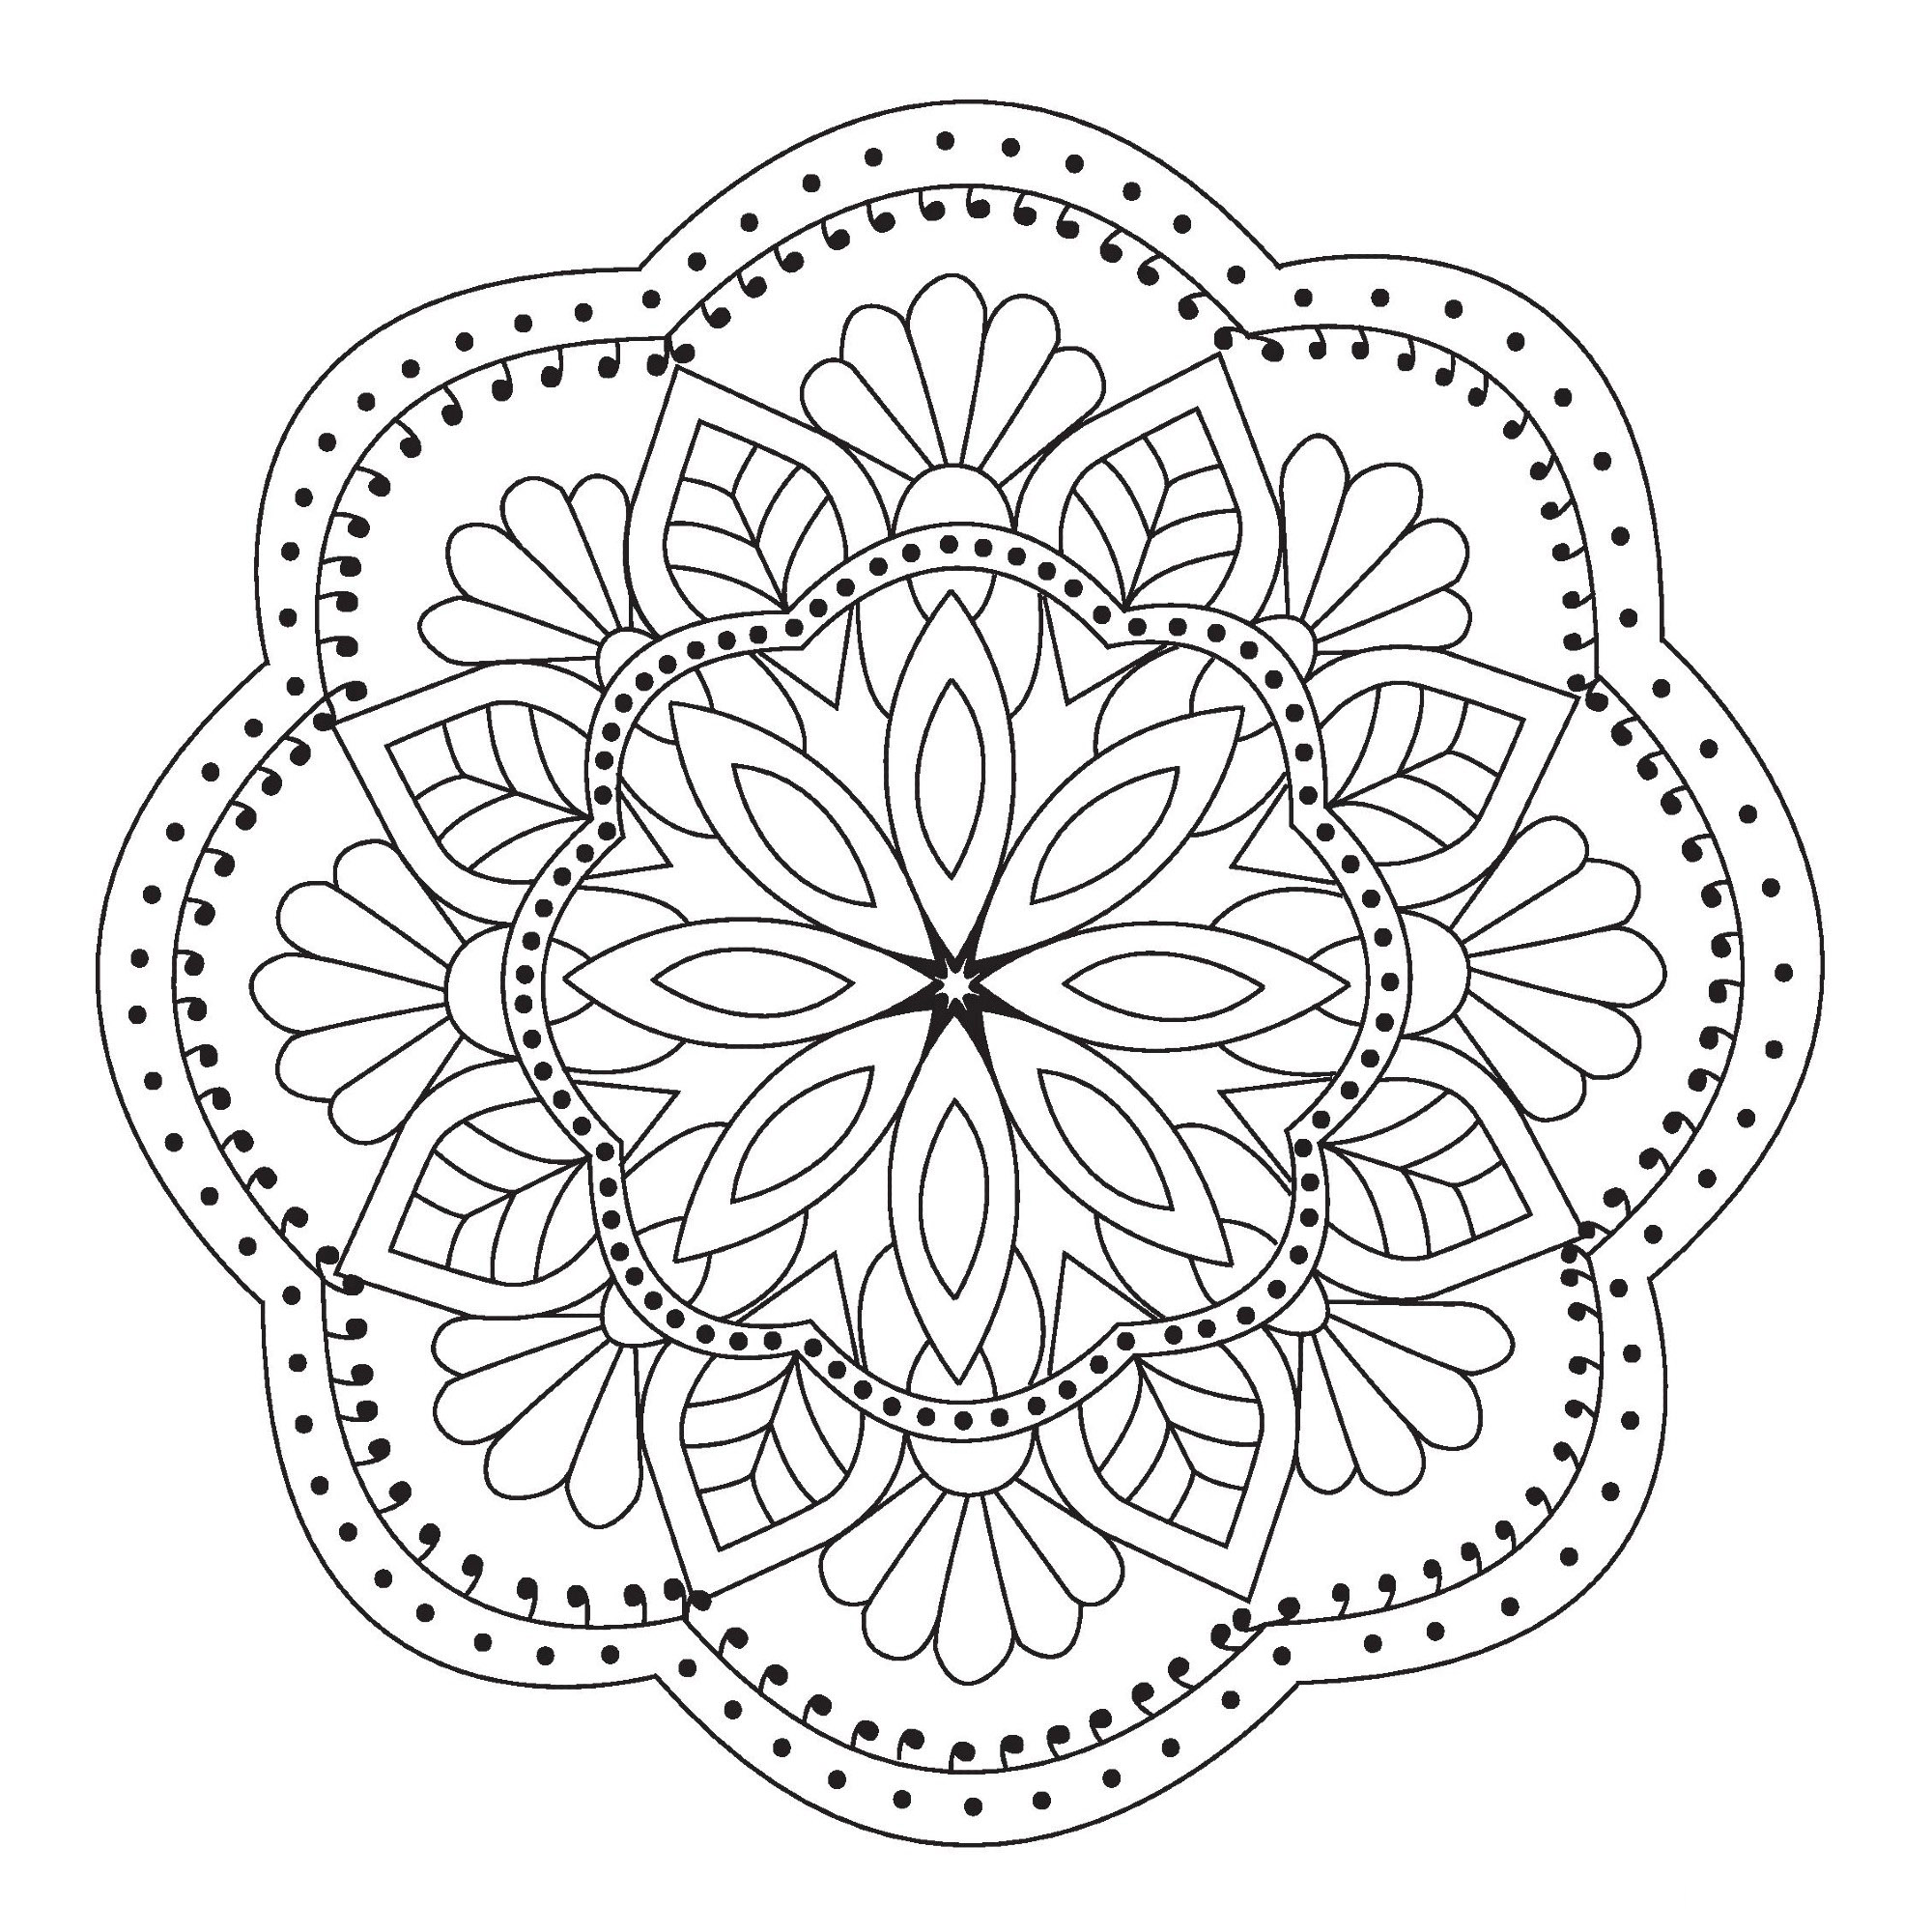 Mandala with fine lines and many details